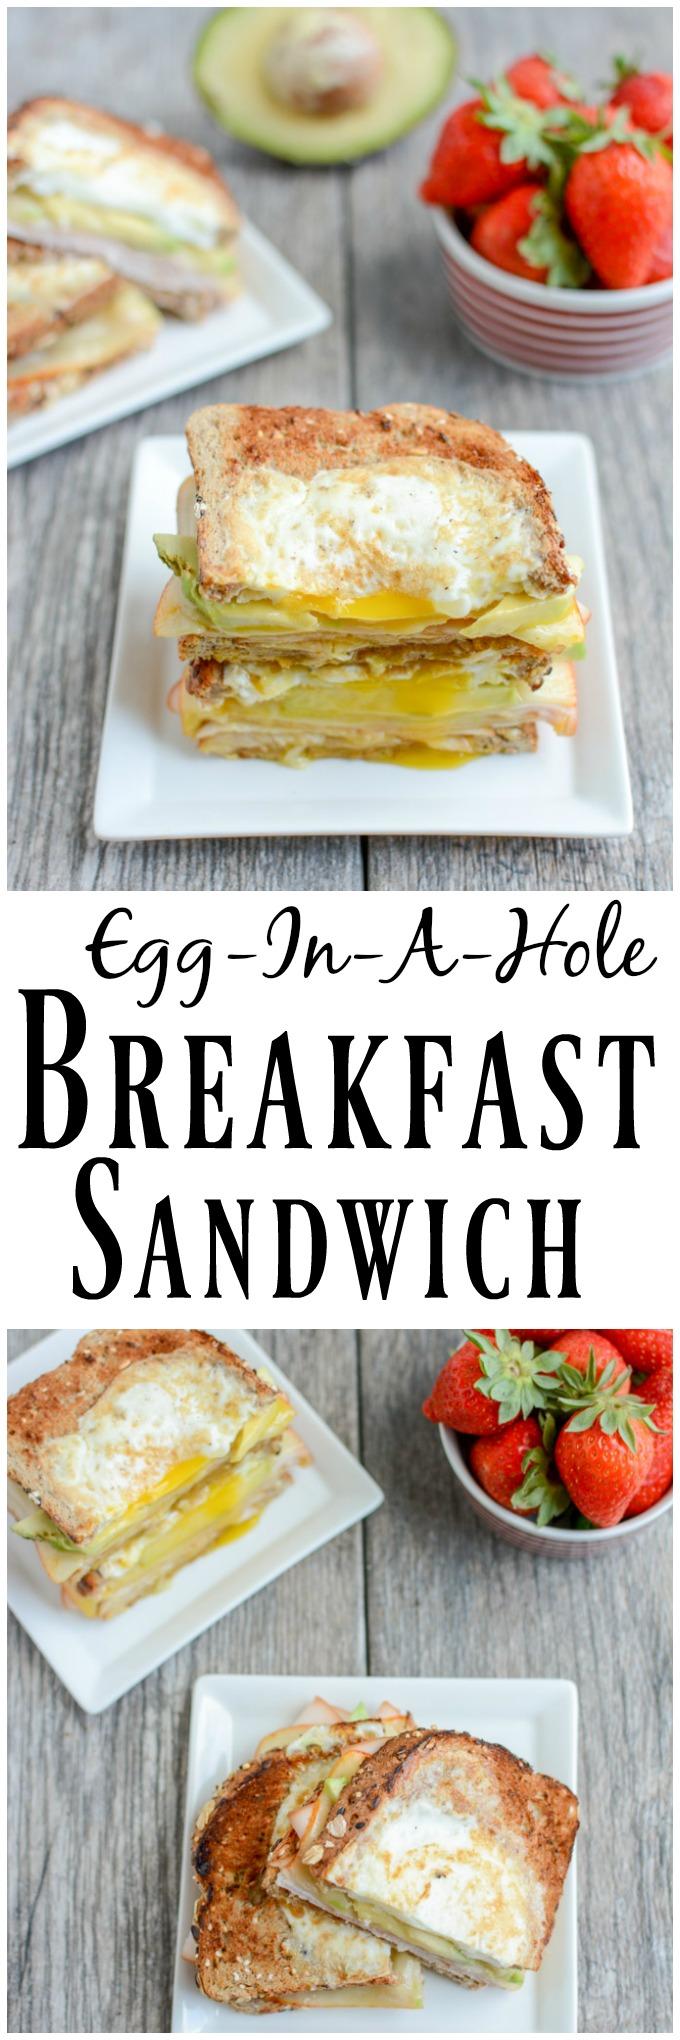 This Egg-In-A-Hole Breakfast Sandwich is a protein-packed, healthy breakfast recipe that's ready in under 5 minutes. The perfect way to start your day!